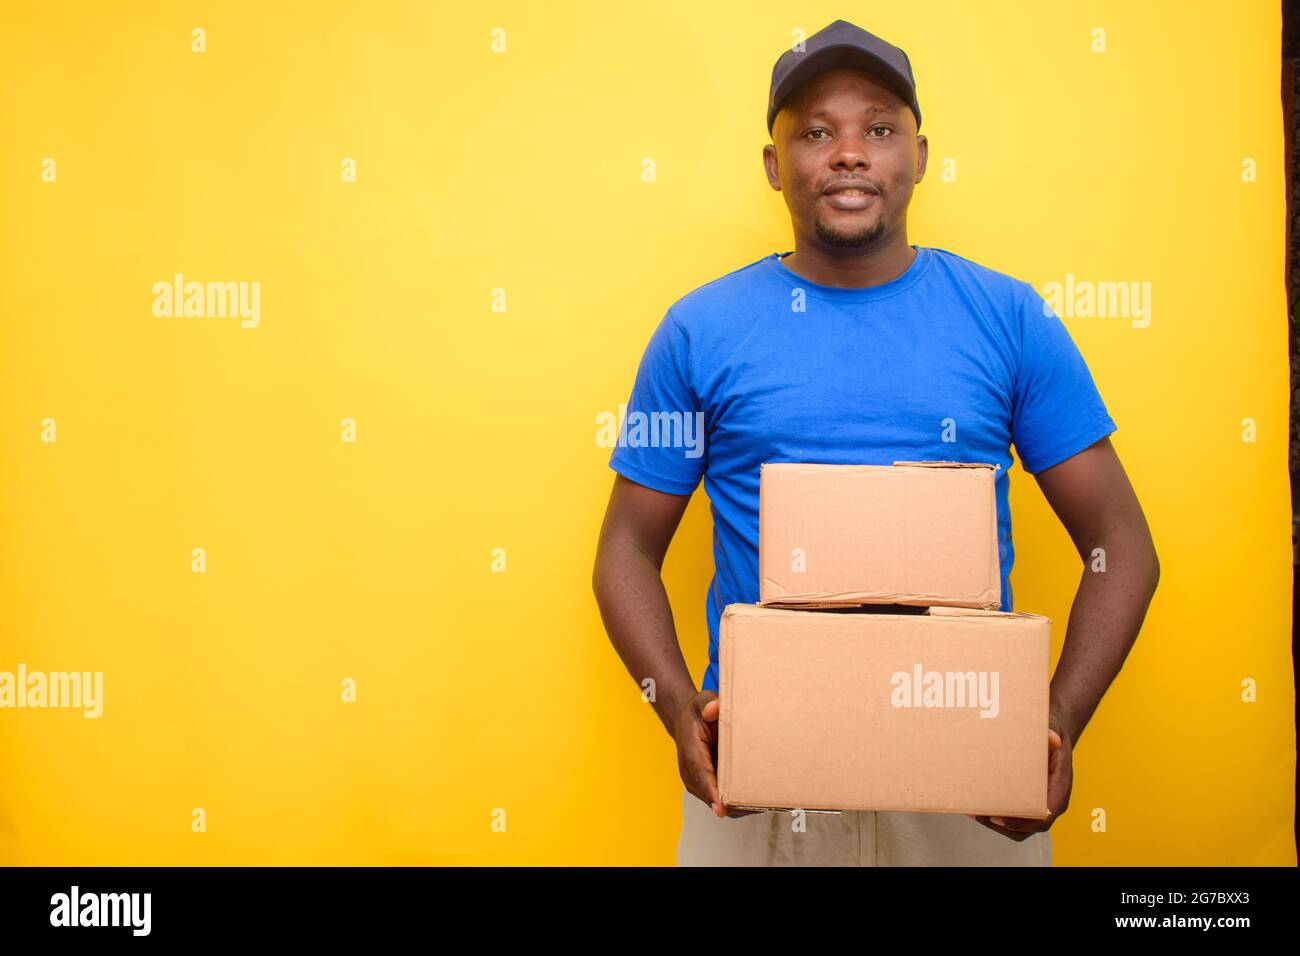 An African delivery or dispatch man carrying boxes and wearing a face cap Stock Photo